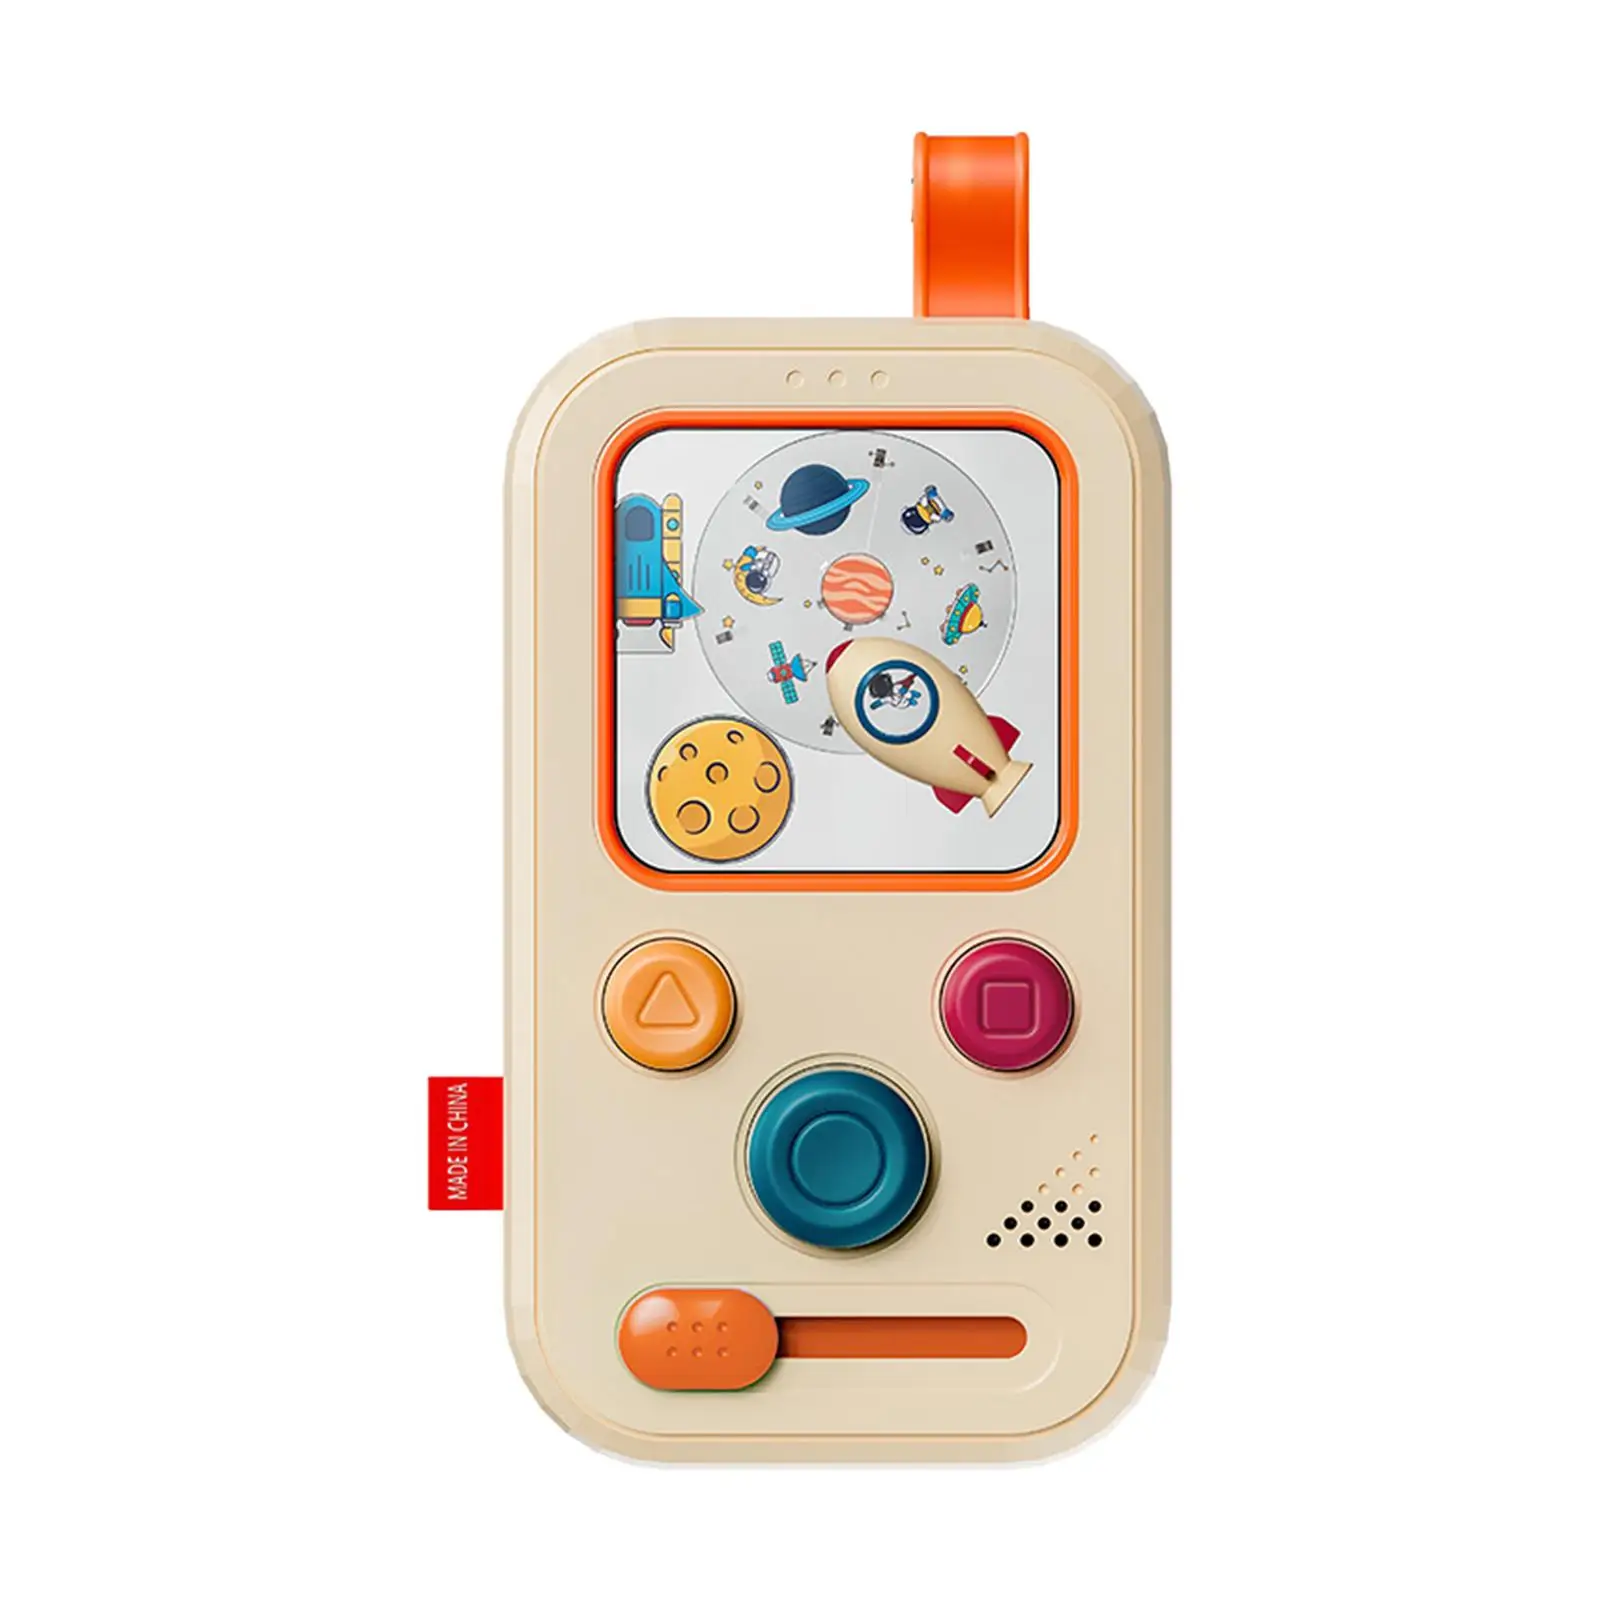 Sensory Toy Educational Puzzle Space Rocket Game Machine Toy Handheld Water Game for Gift Party Favor Bedroom Outing Baby